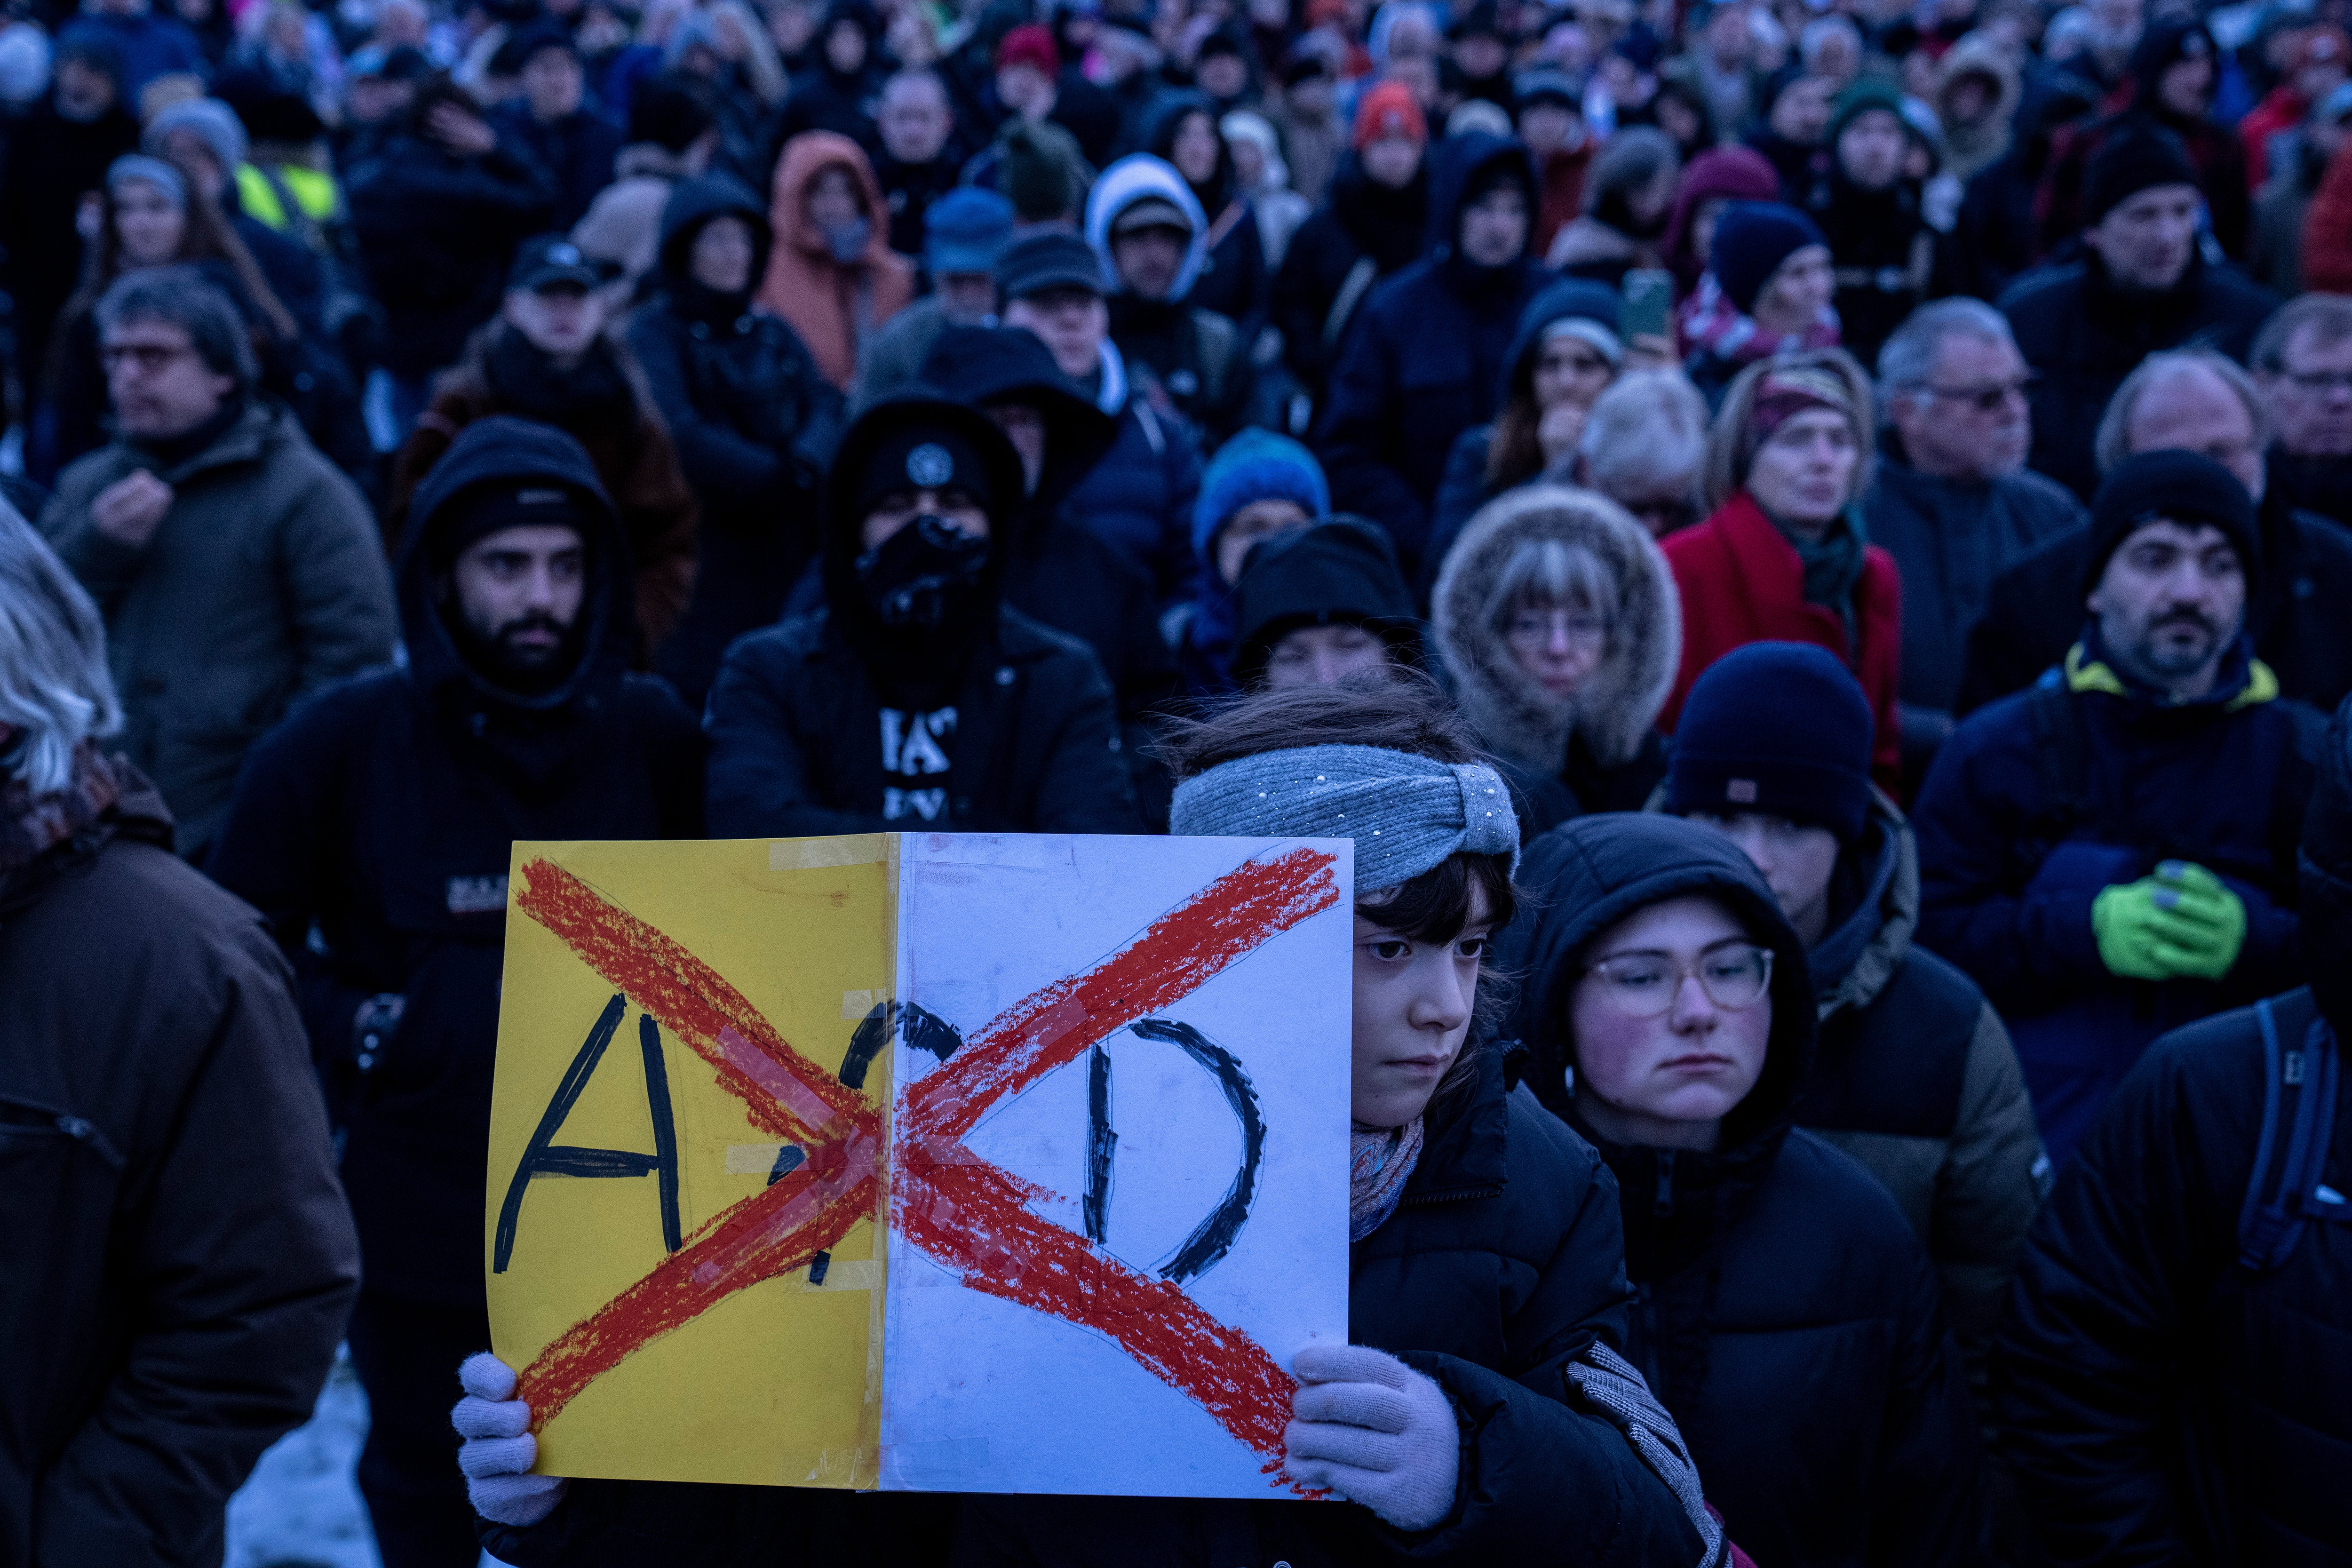 People gather to protest against the far-right Alternative for Germany, or AfD party, and right-wing extremism in front of the parliament building in Berlin, Germany